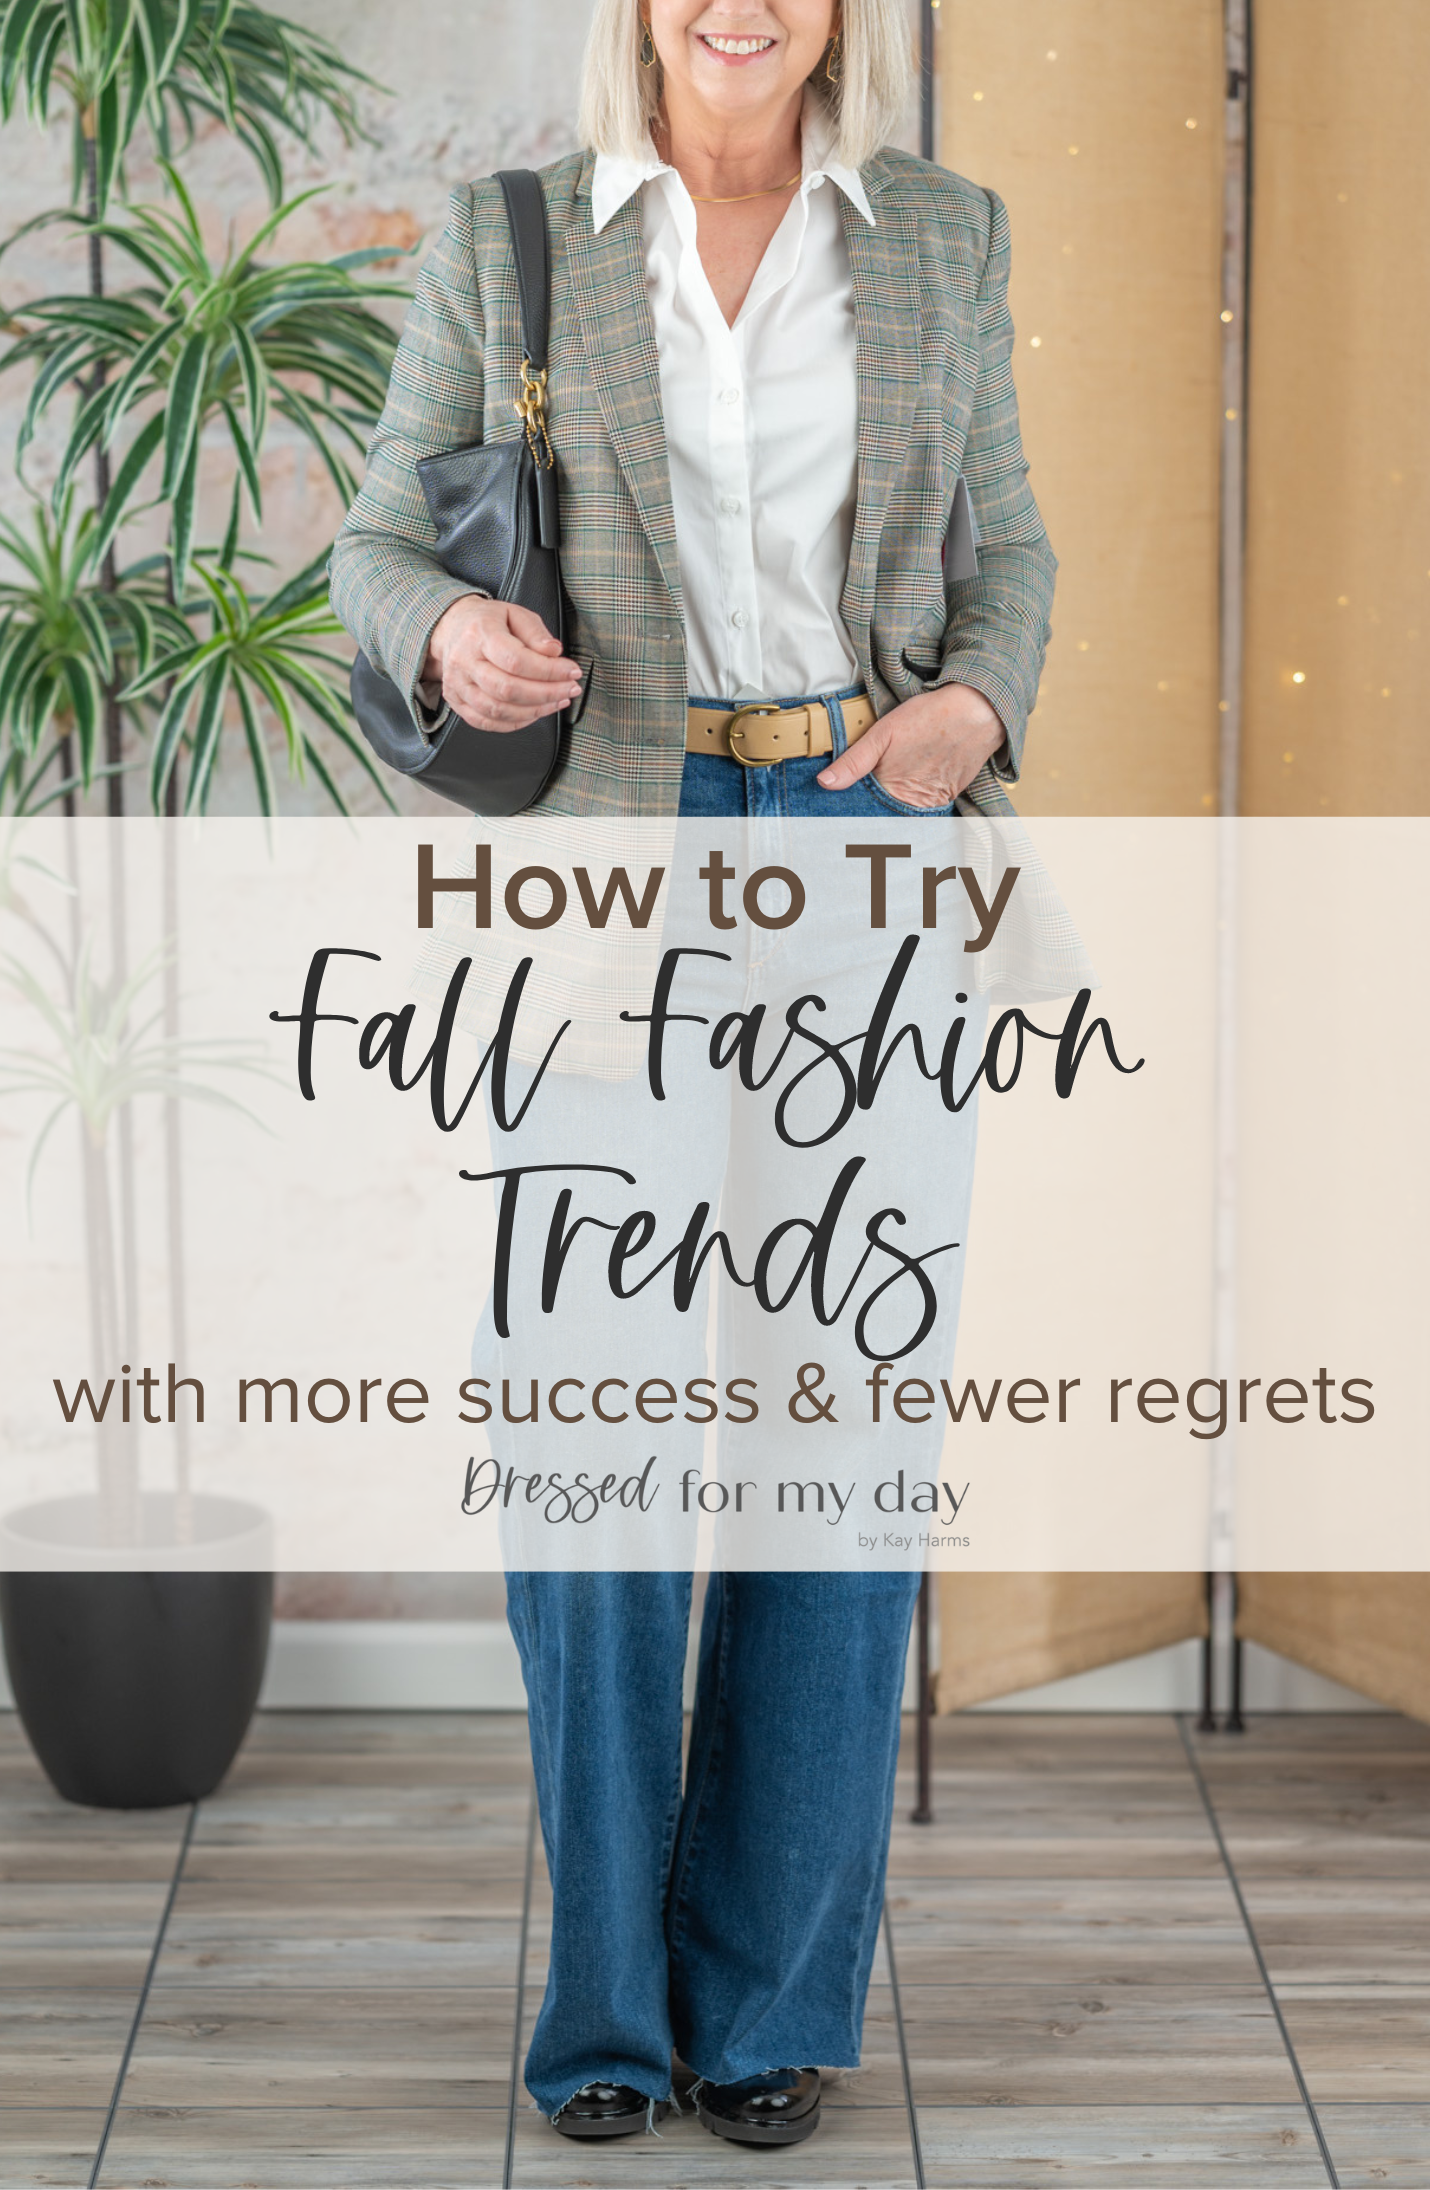 THIS OR THAT WITH J.JILL AND TALBOTS - 50 IS NOT OLD - A Fashion And Beauty  Blog For Women Over 50